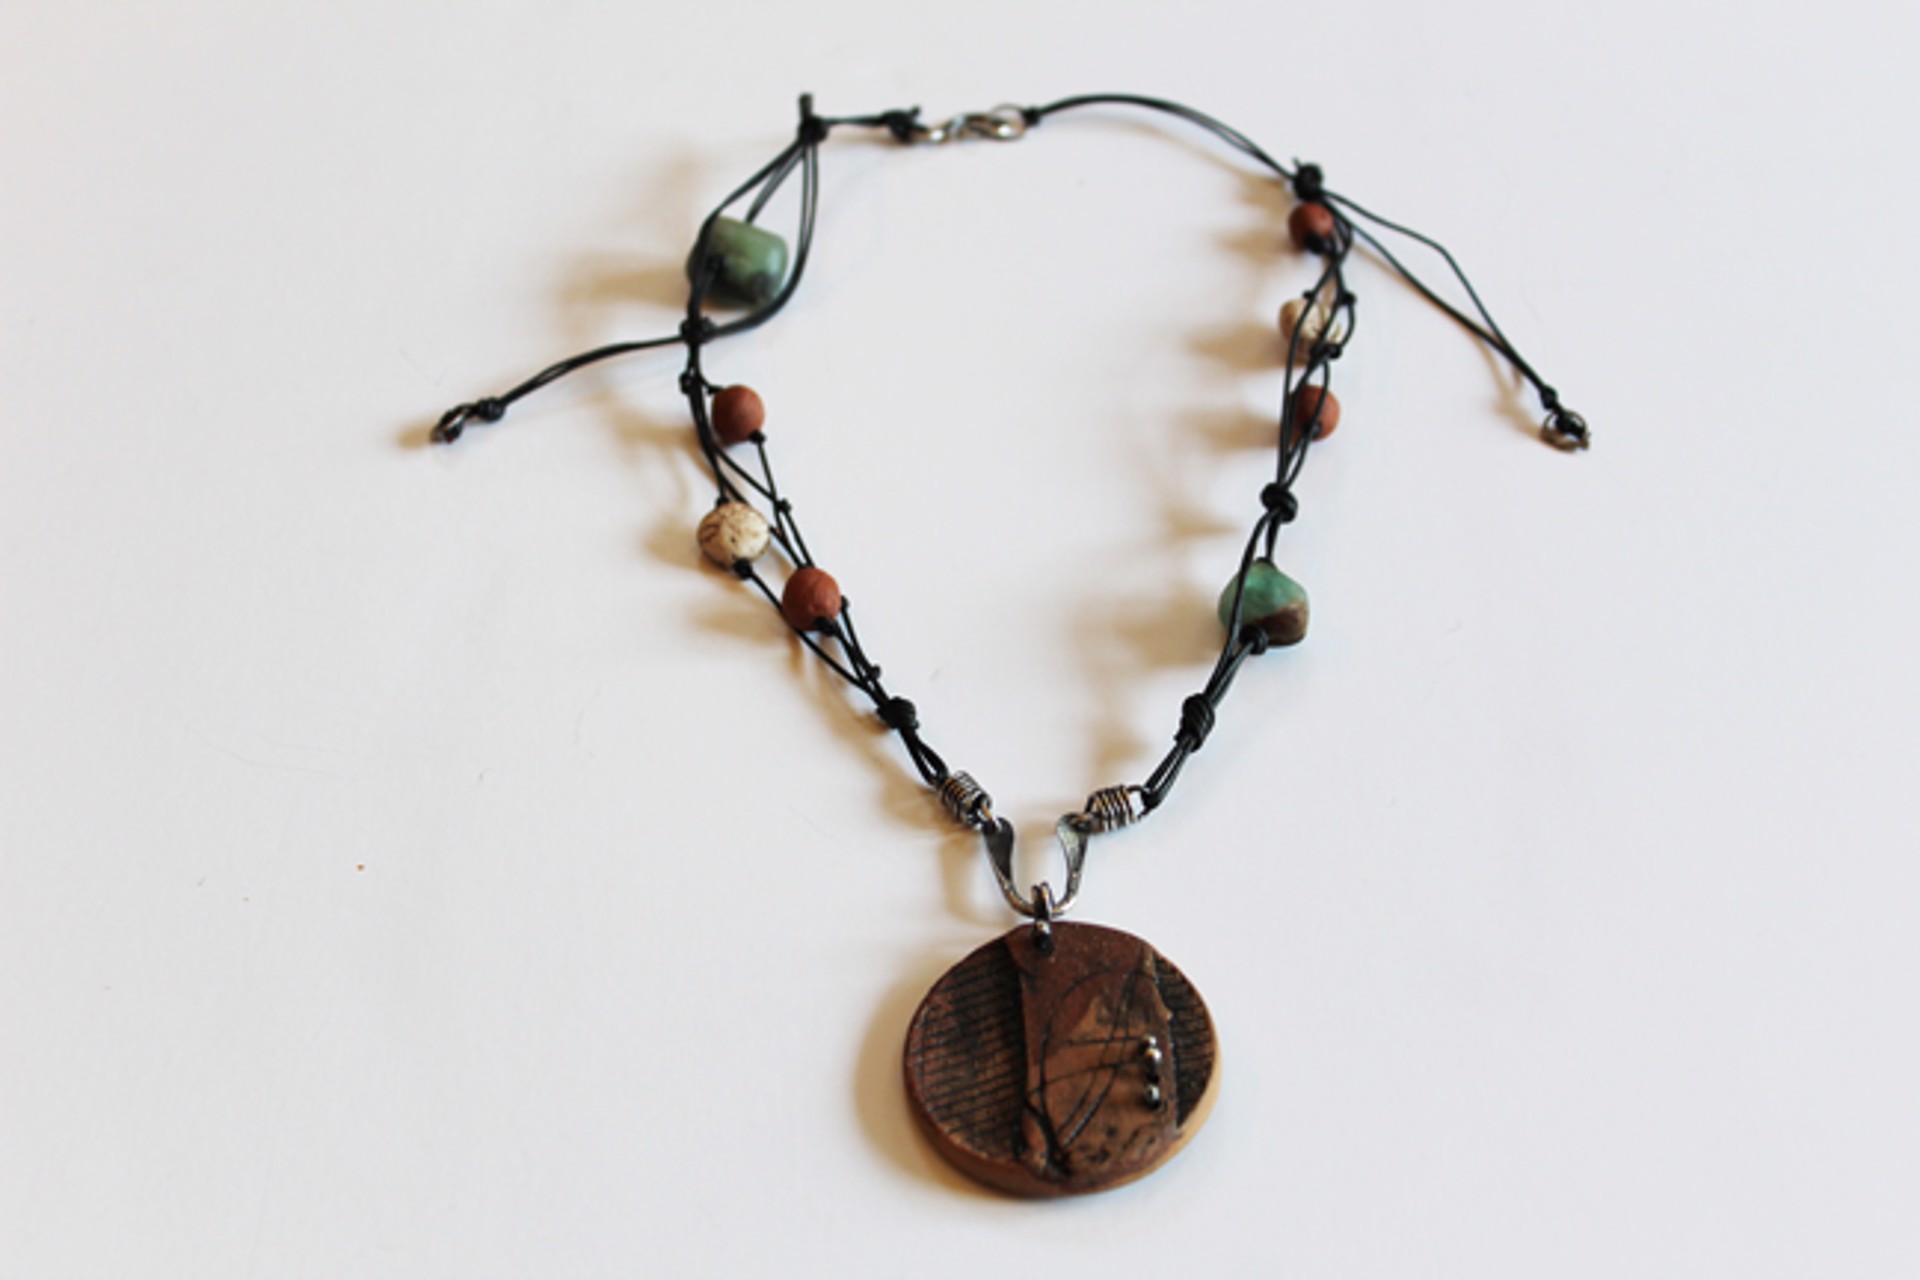 Stone & Clay Beads & Ceramic Pendant on Leather Necklace by Mary Lynn Portera